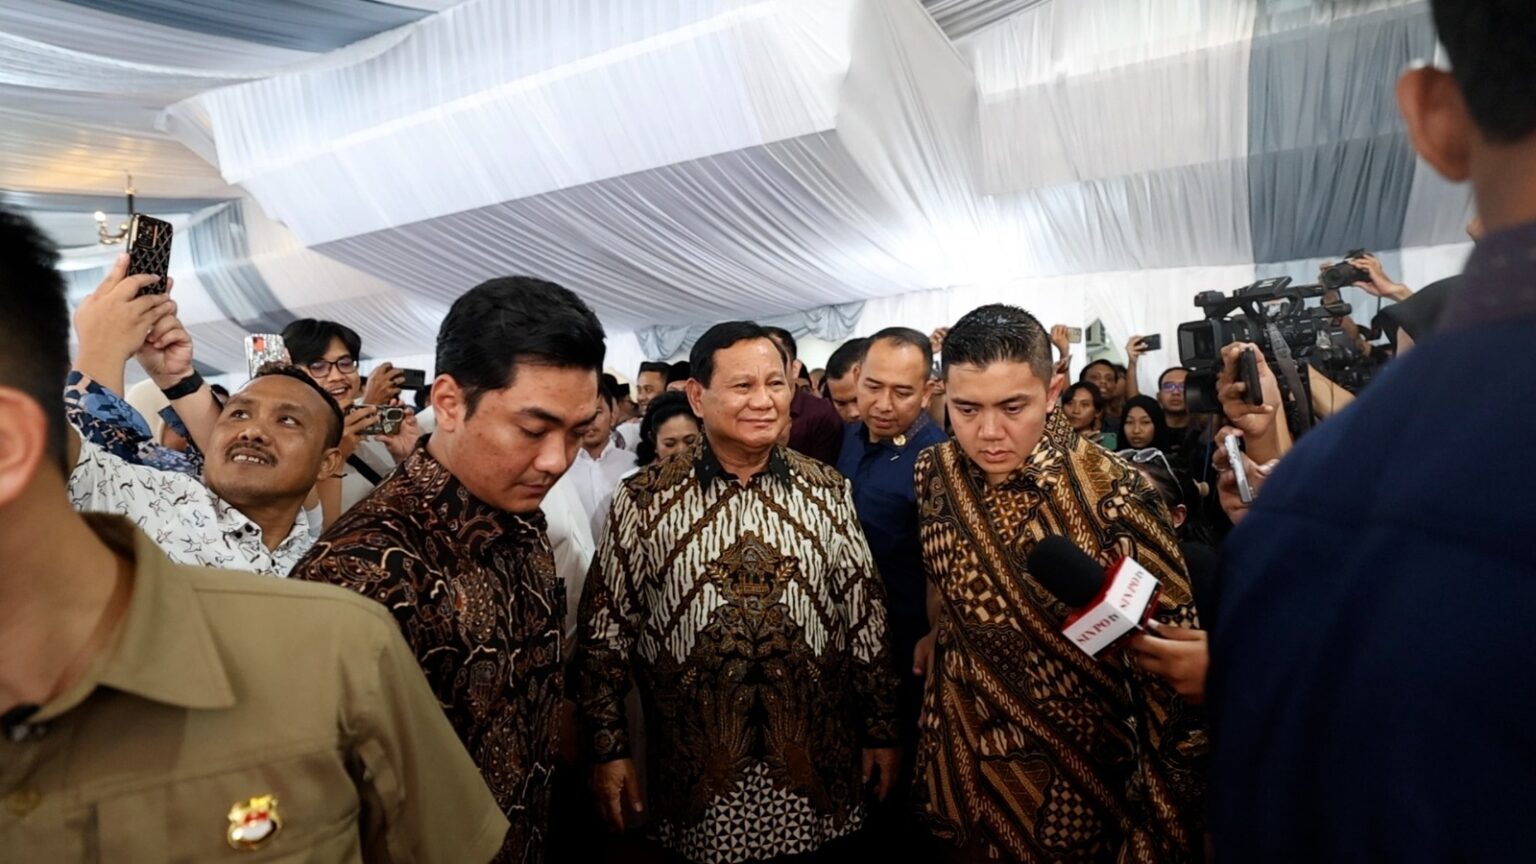 Prabowo Subianto Extends Eid Greetings to the Media on the Second Day of Eid